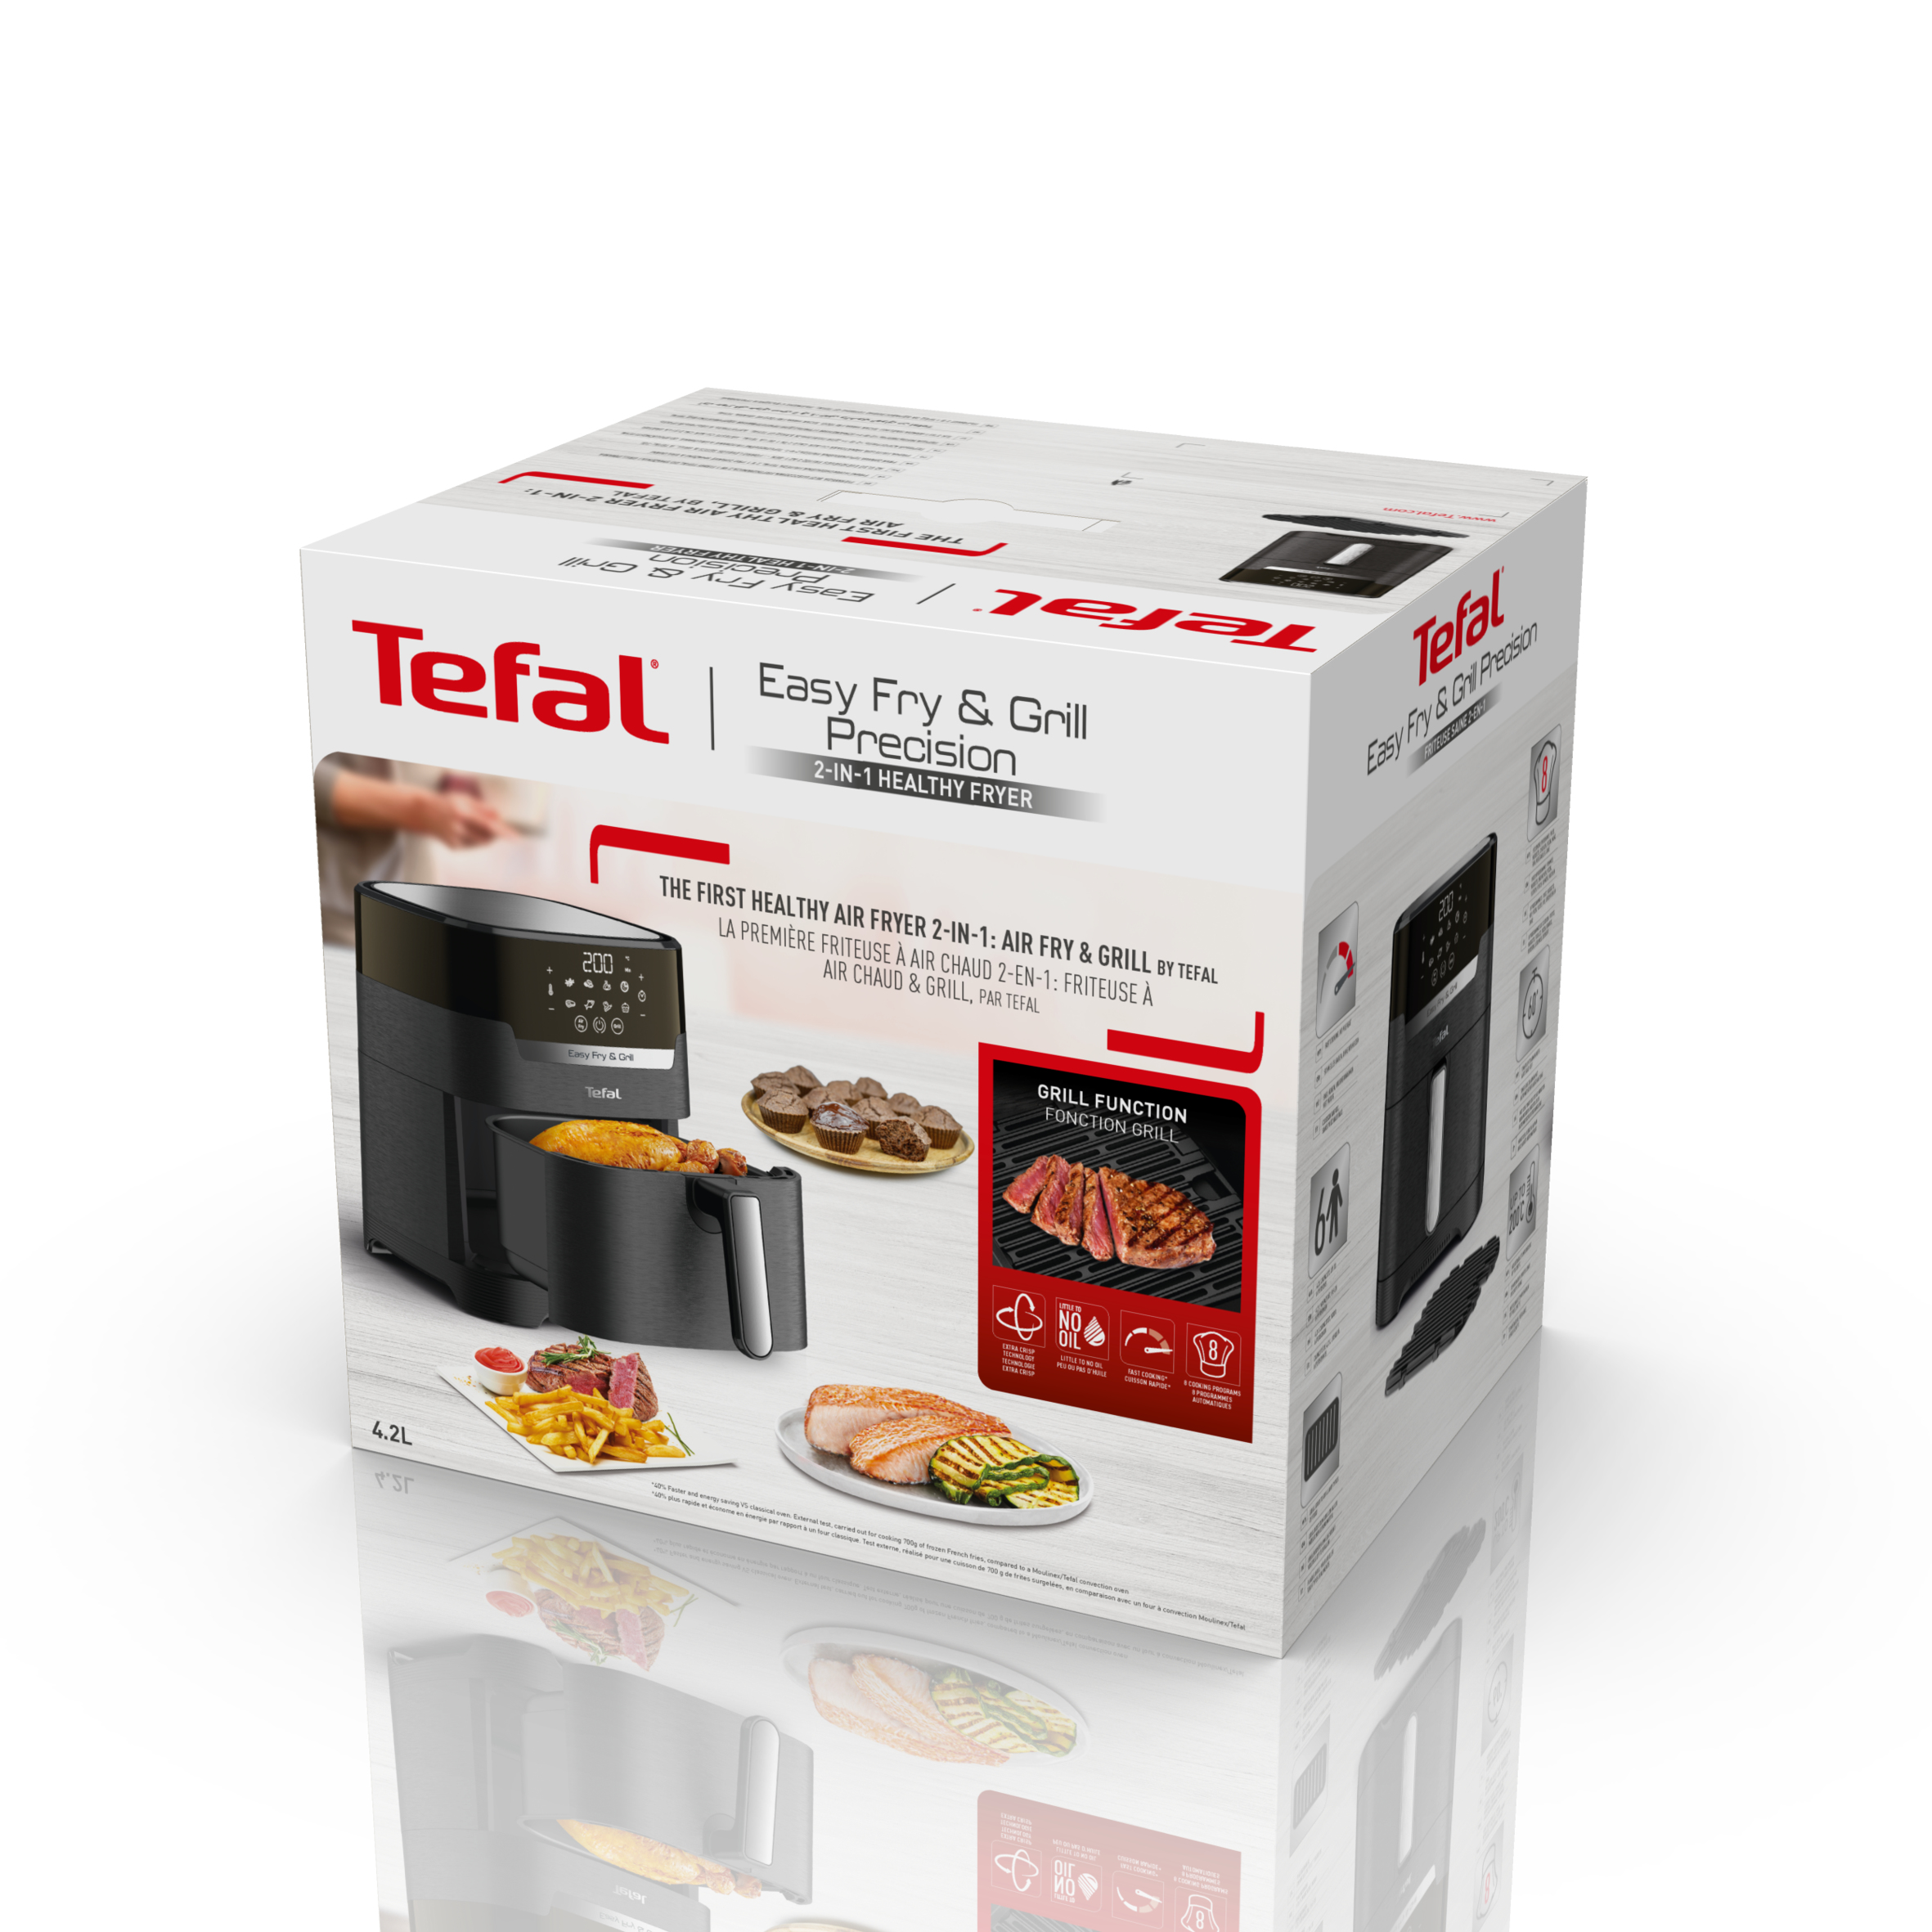 TEFAL Easy Fry & Grill XL Precision Heißluftfritteuse